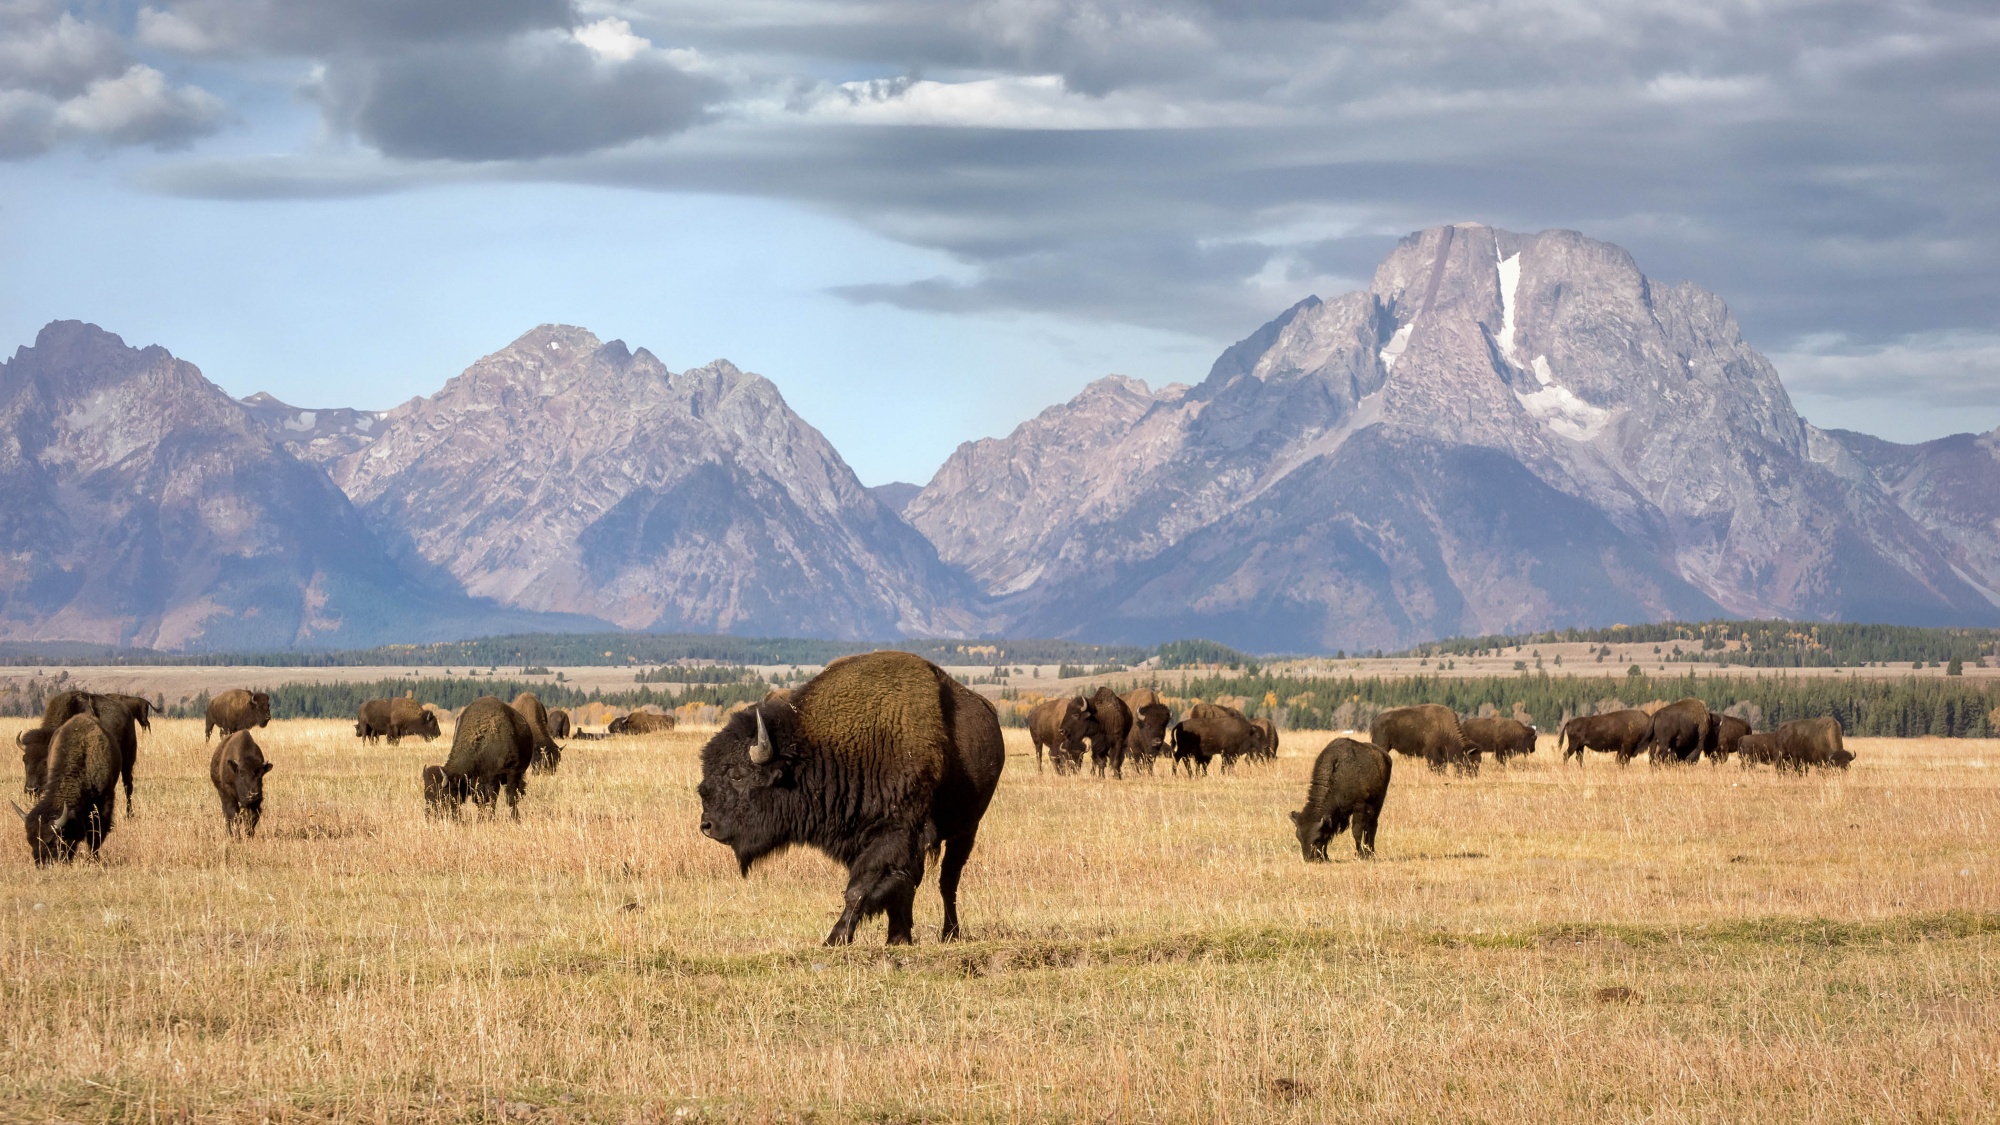 Best remote destinations, wild bison roaming freely in Grand Teton National Park Wyoming